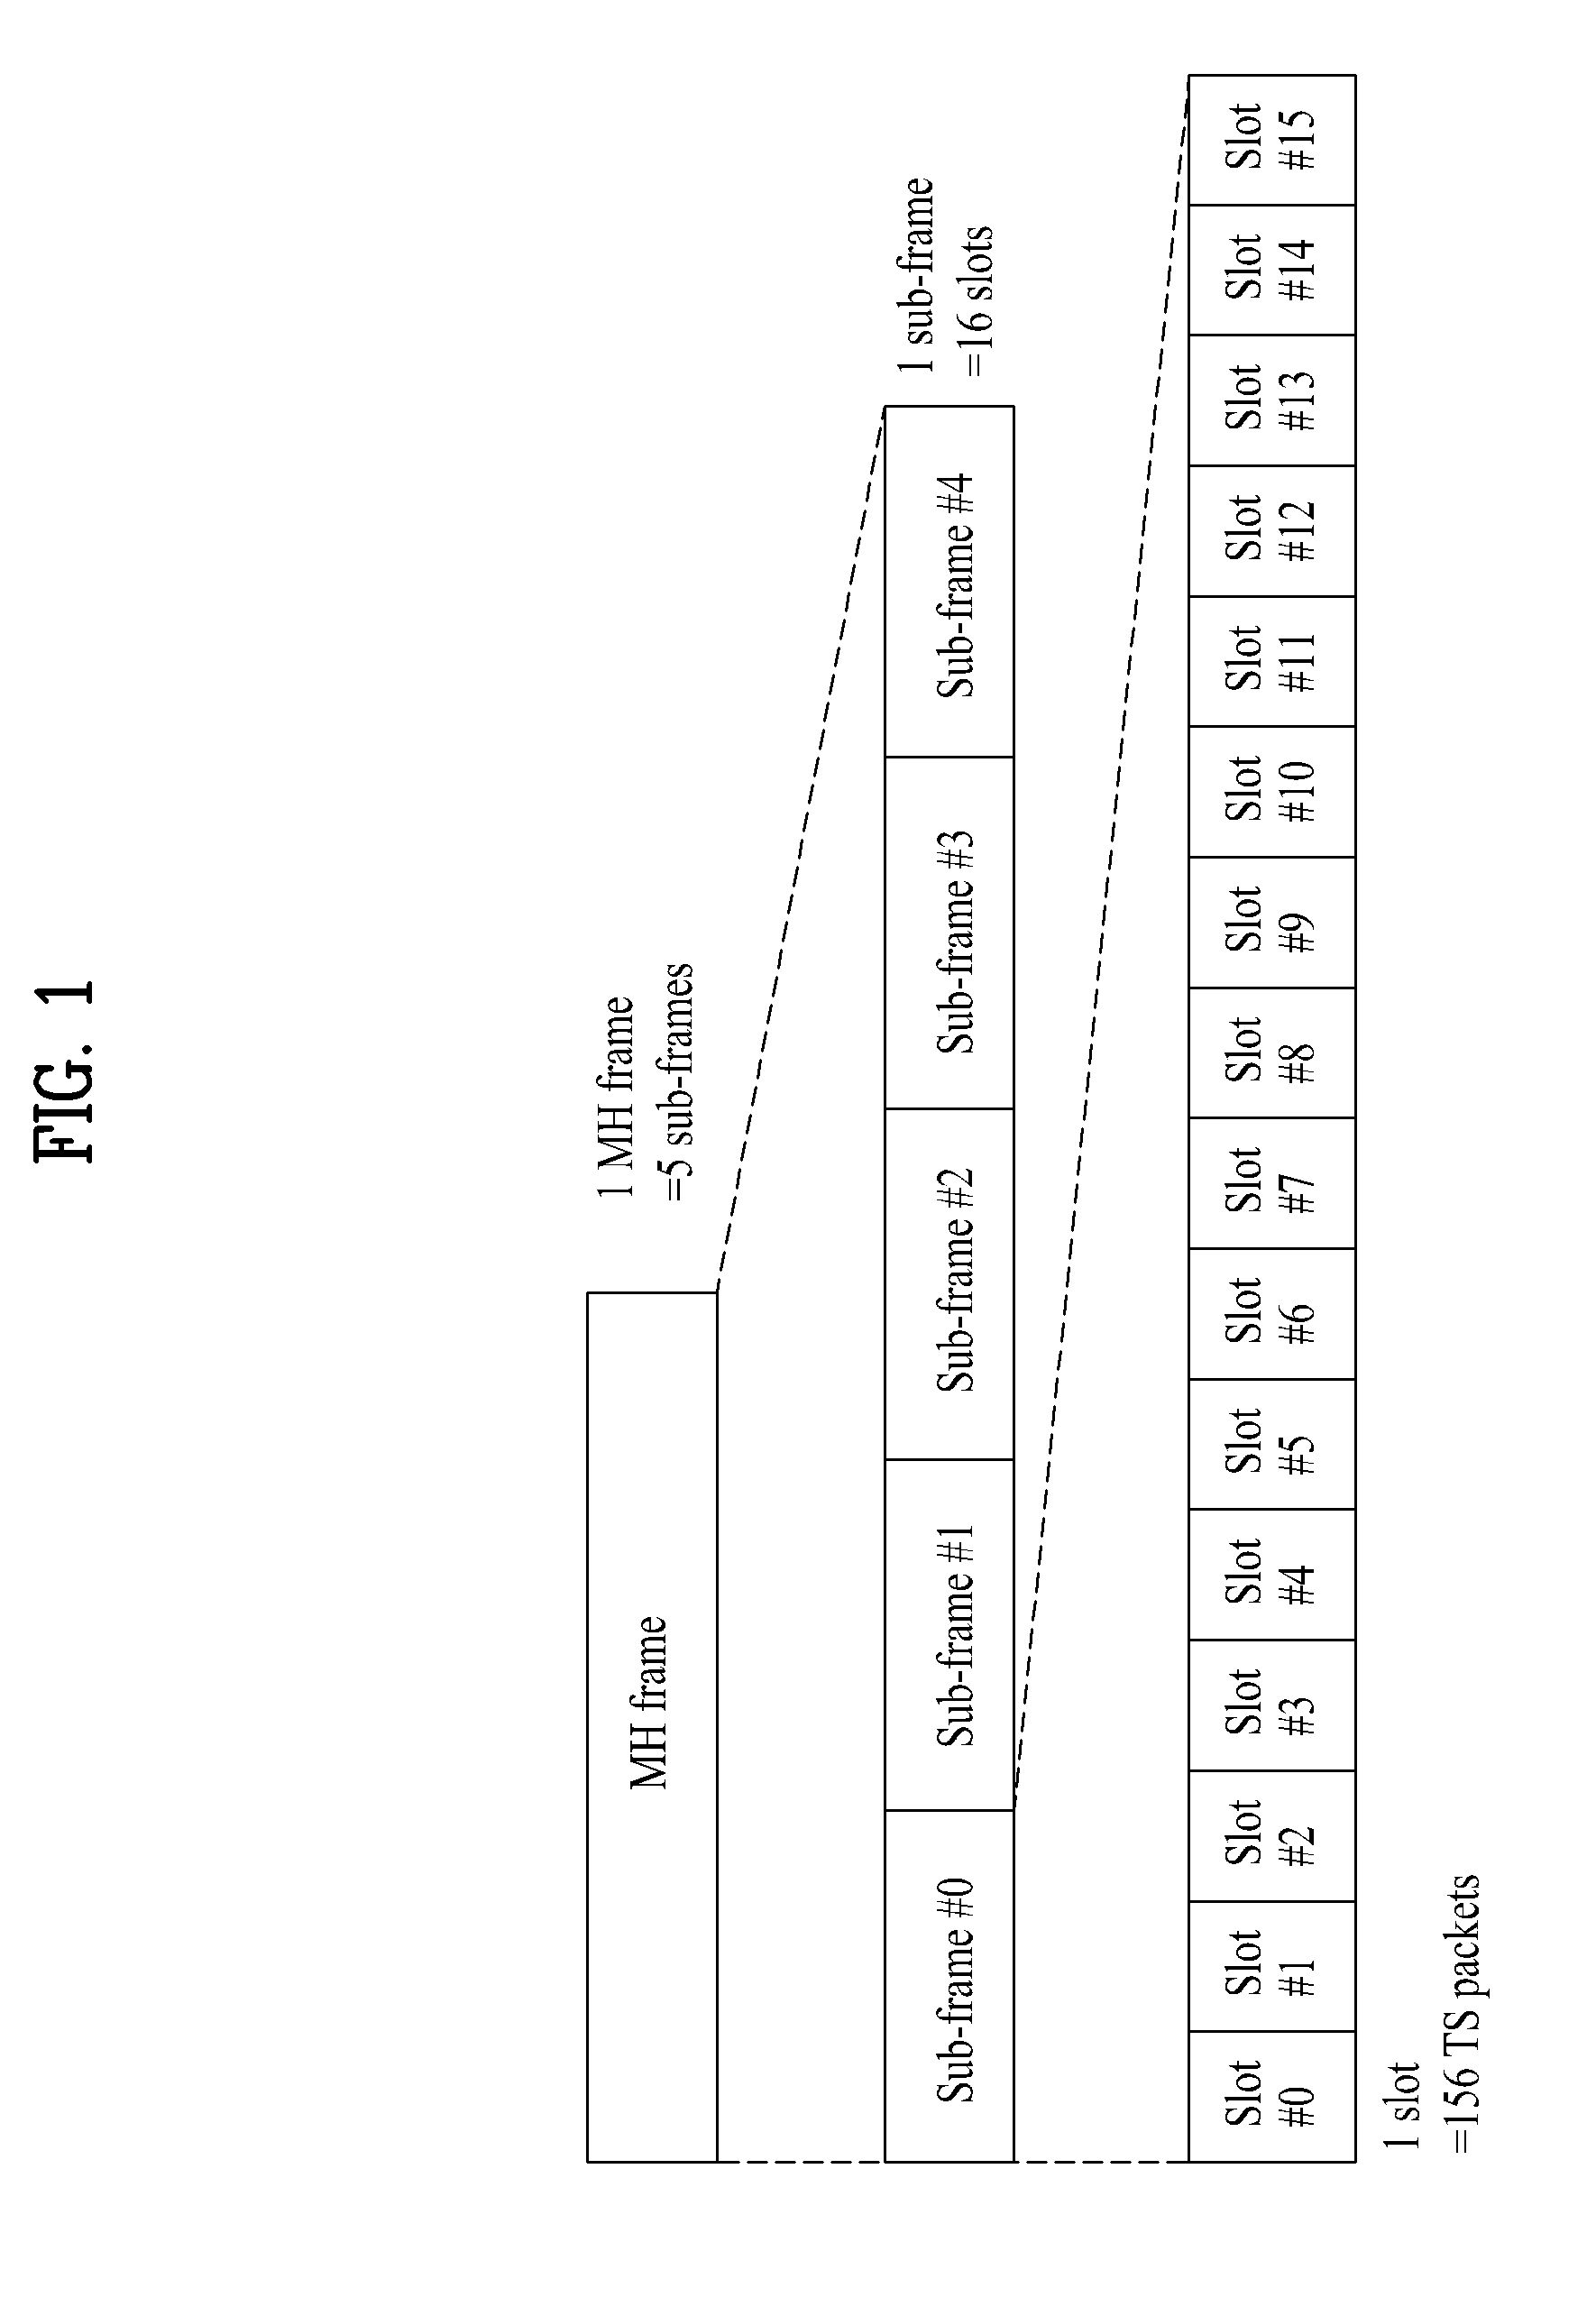 Digital broadcasting system and method of processing data in the digital broadcasting system